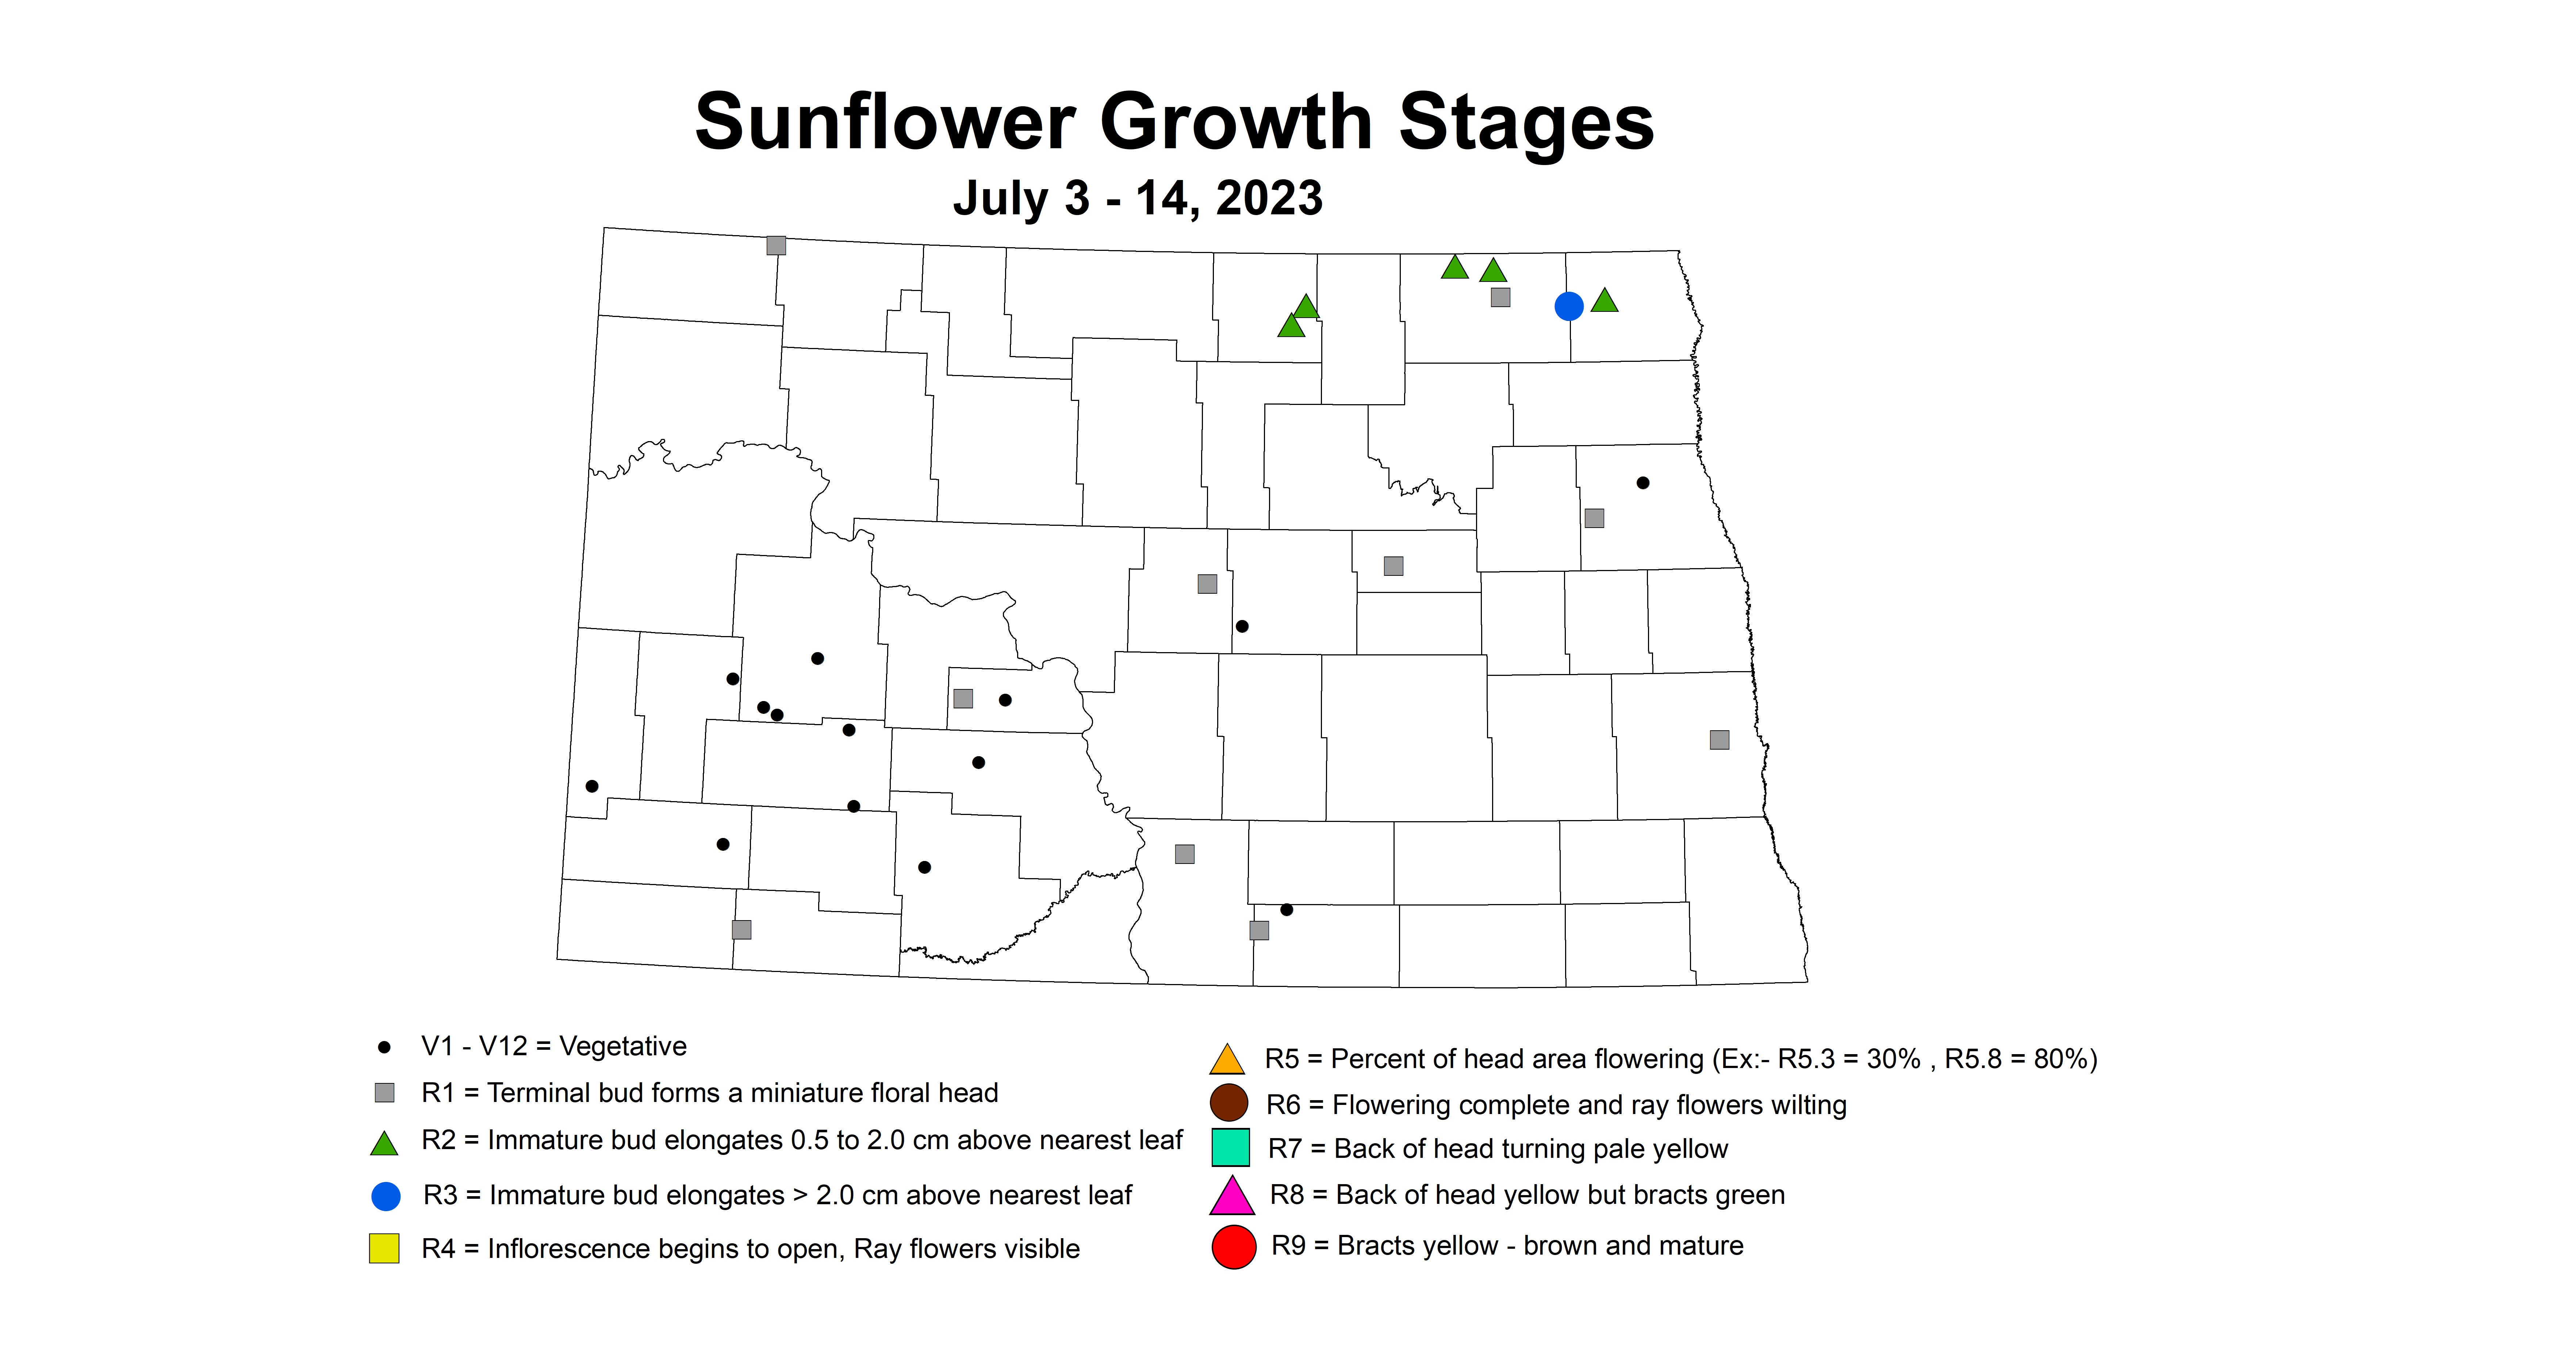 sunflower growth stages July 3-14 2023